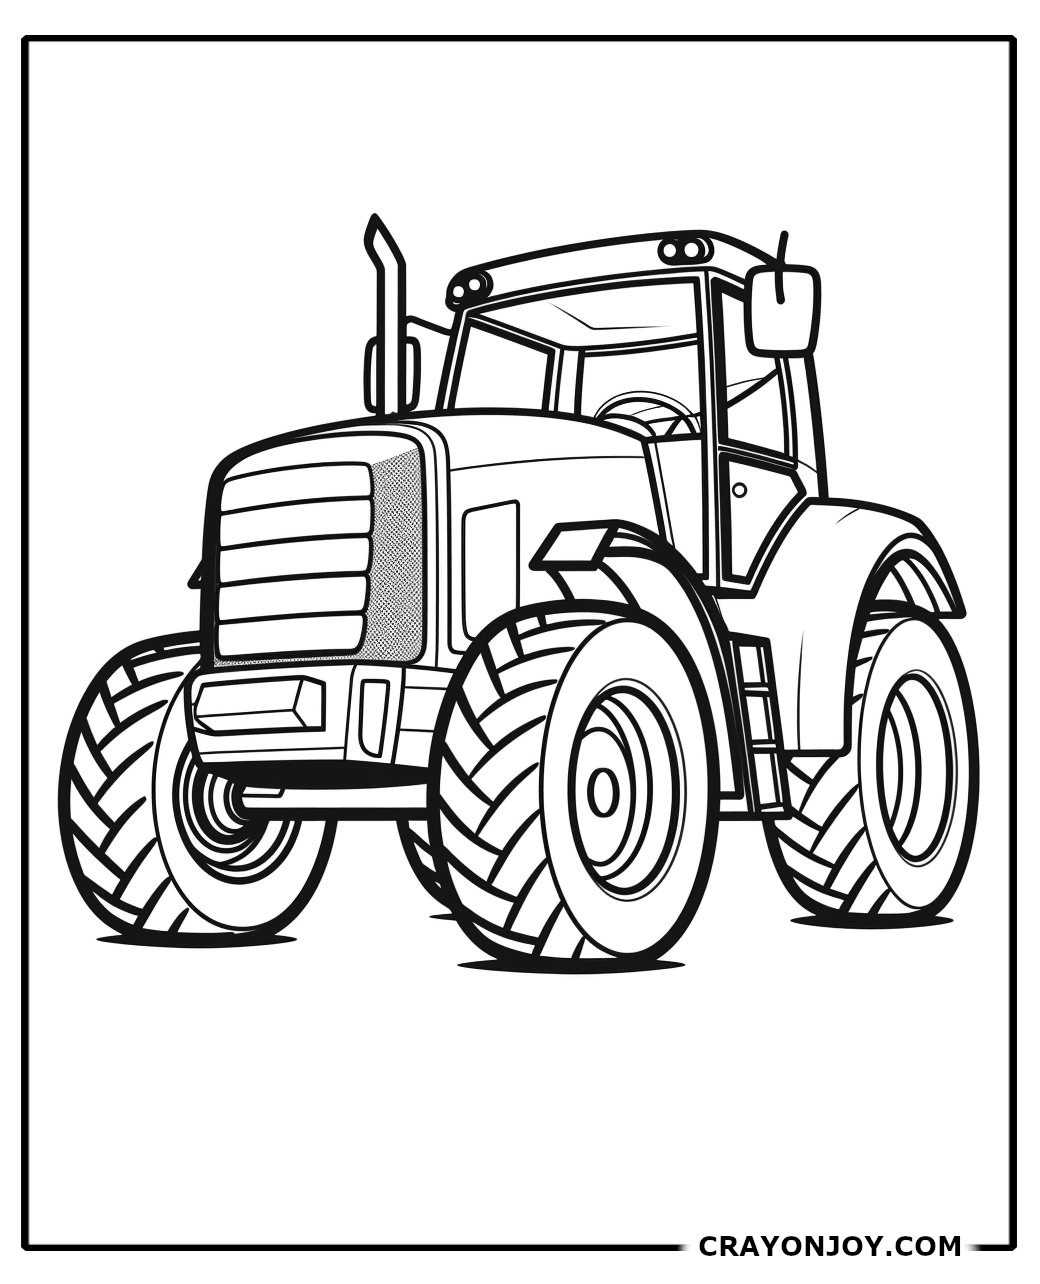 Free Printable Tractor Coloring Pages for Kids and Adults